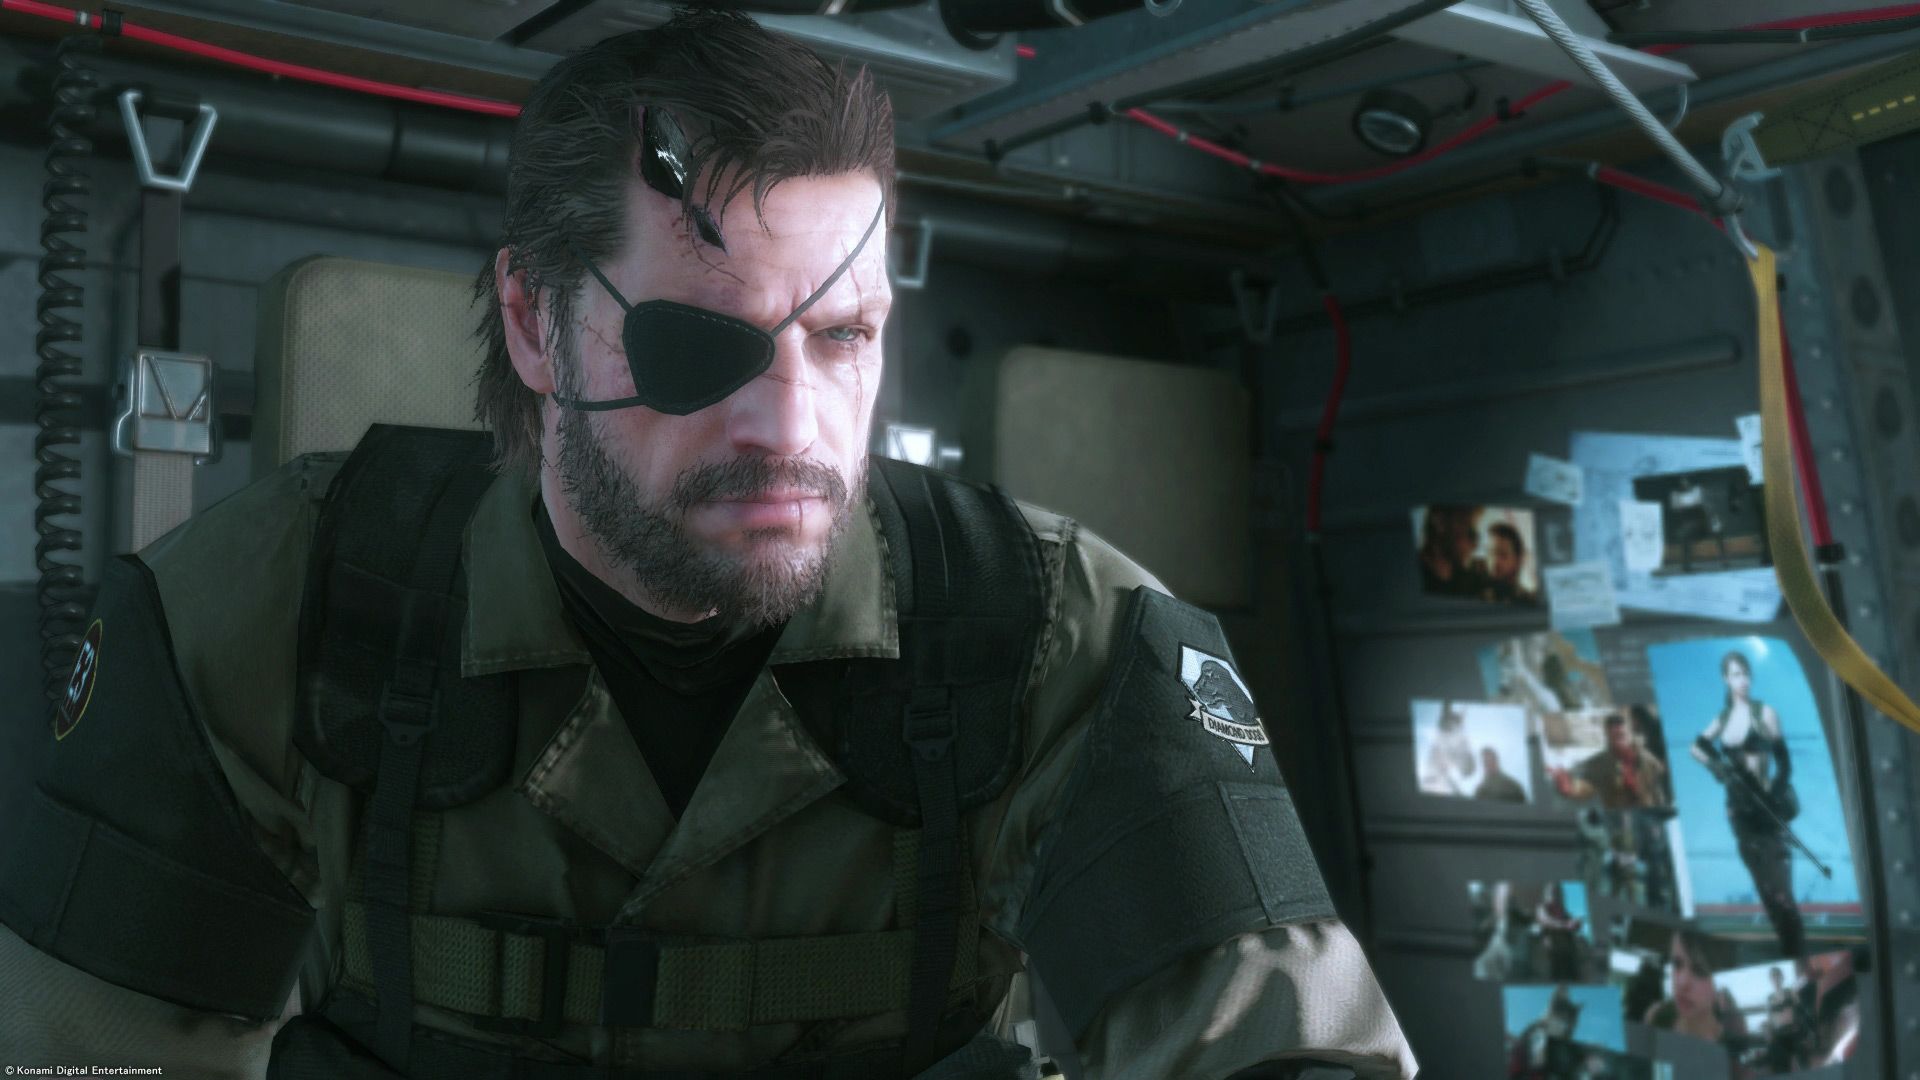 Metal Gear Solid V: The Phantom Pain Review Roundup - GameSpot